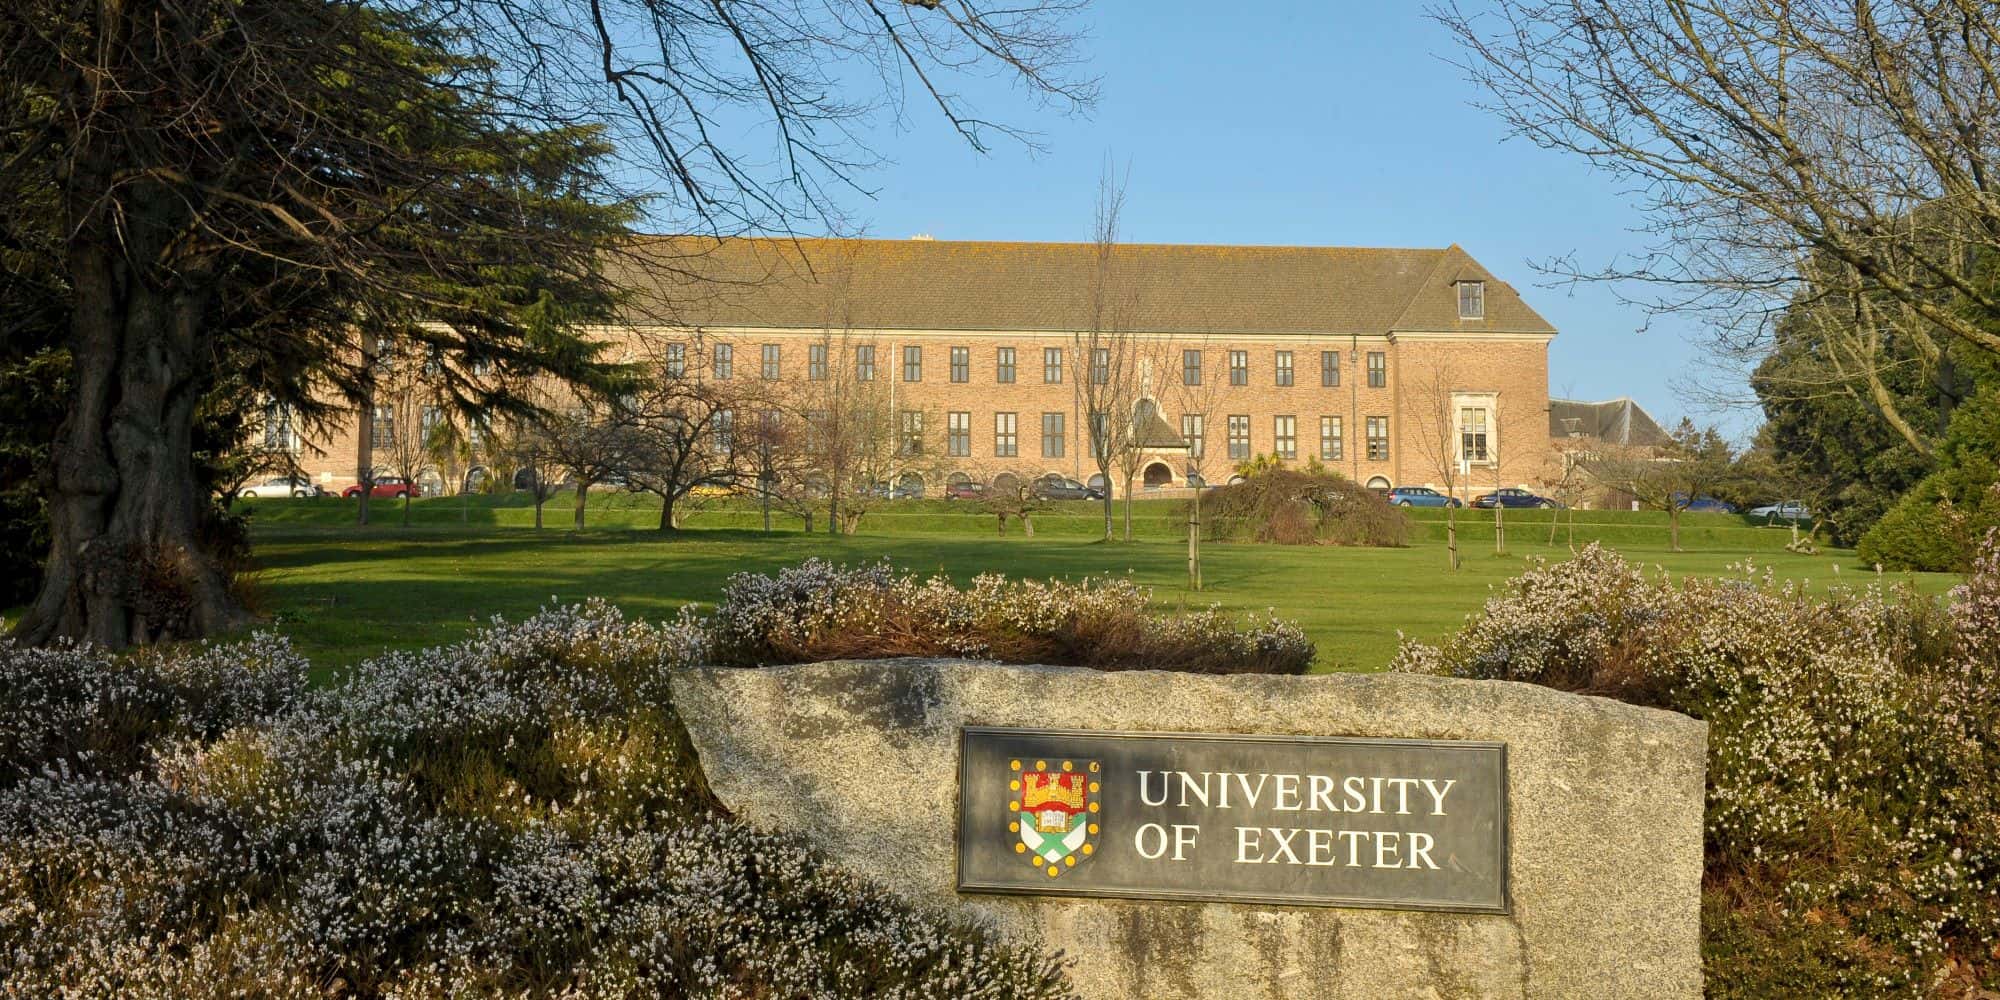 Travel & Hotel Guide When Visiting University of Exeter